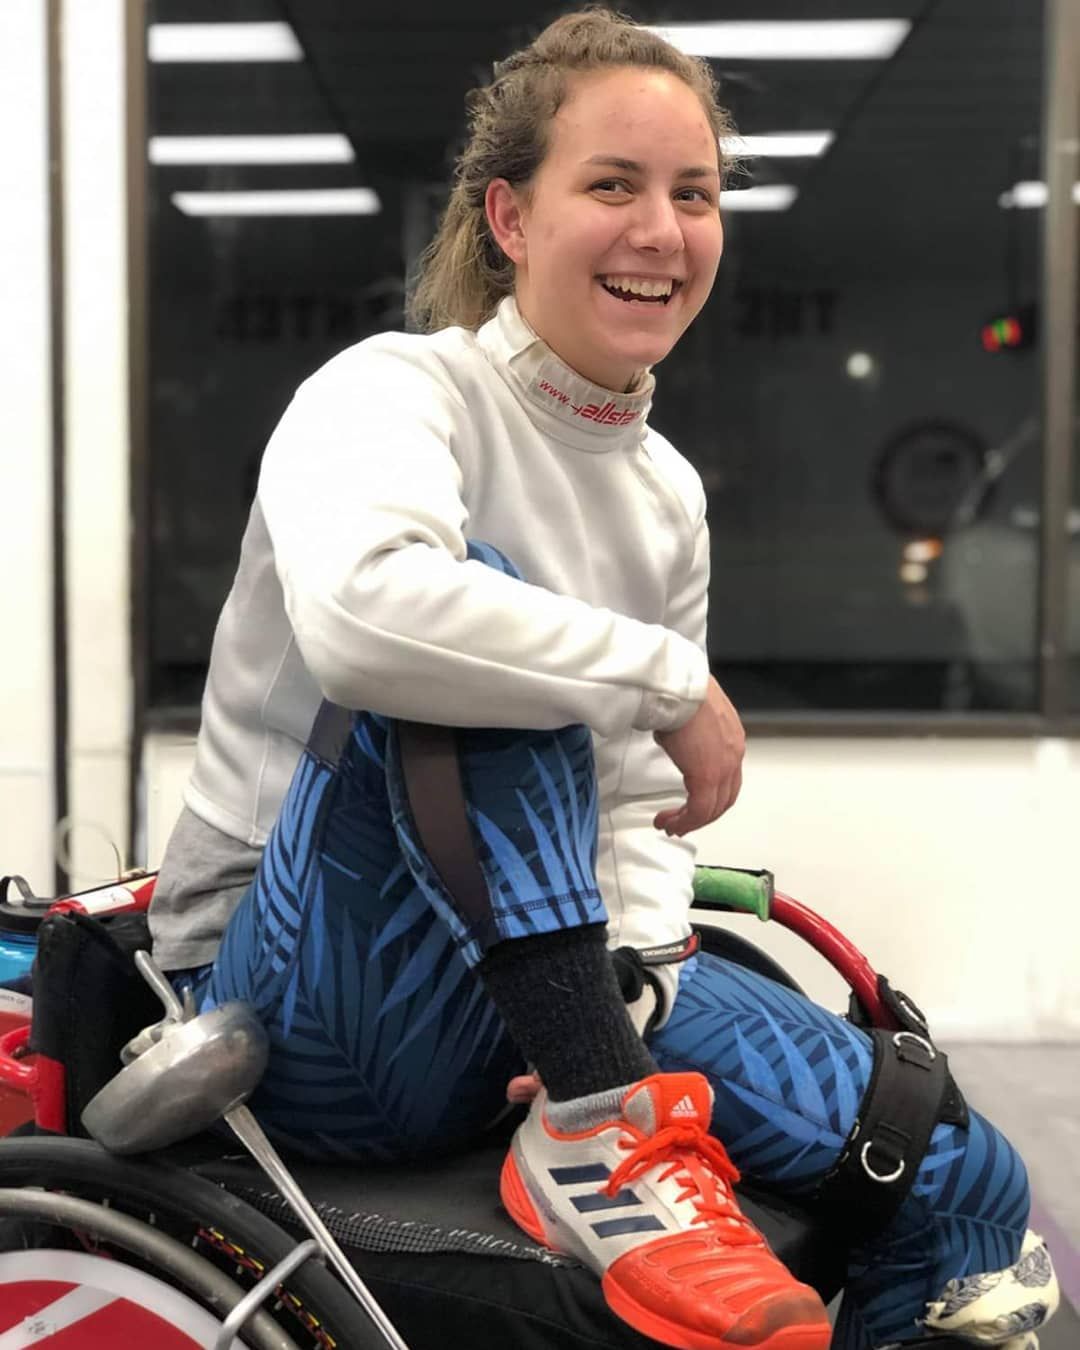 Victoria laughs during a break from fencing at the Phoenix Center in Poughkeepsie, NY. Image courtesy of Victoria Isaacson. United States, 2019.